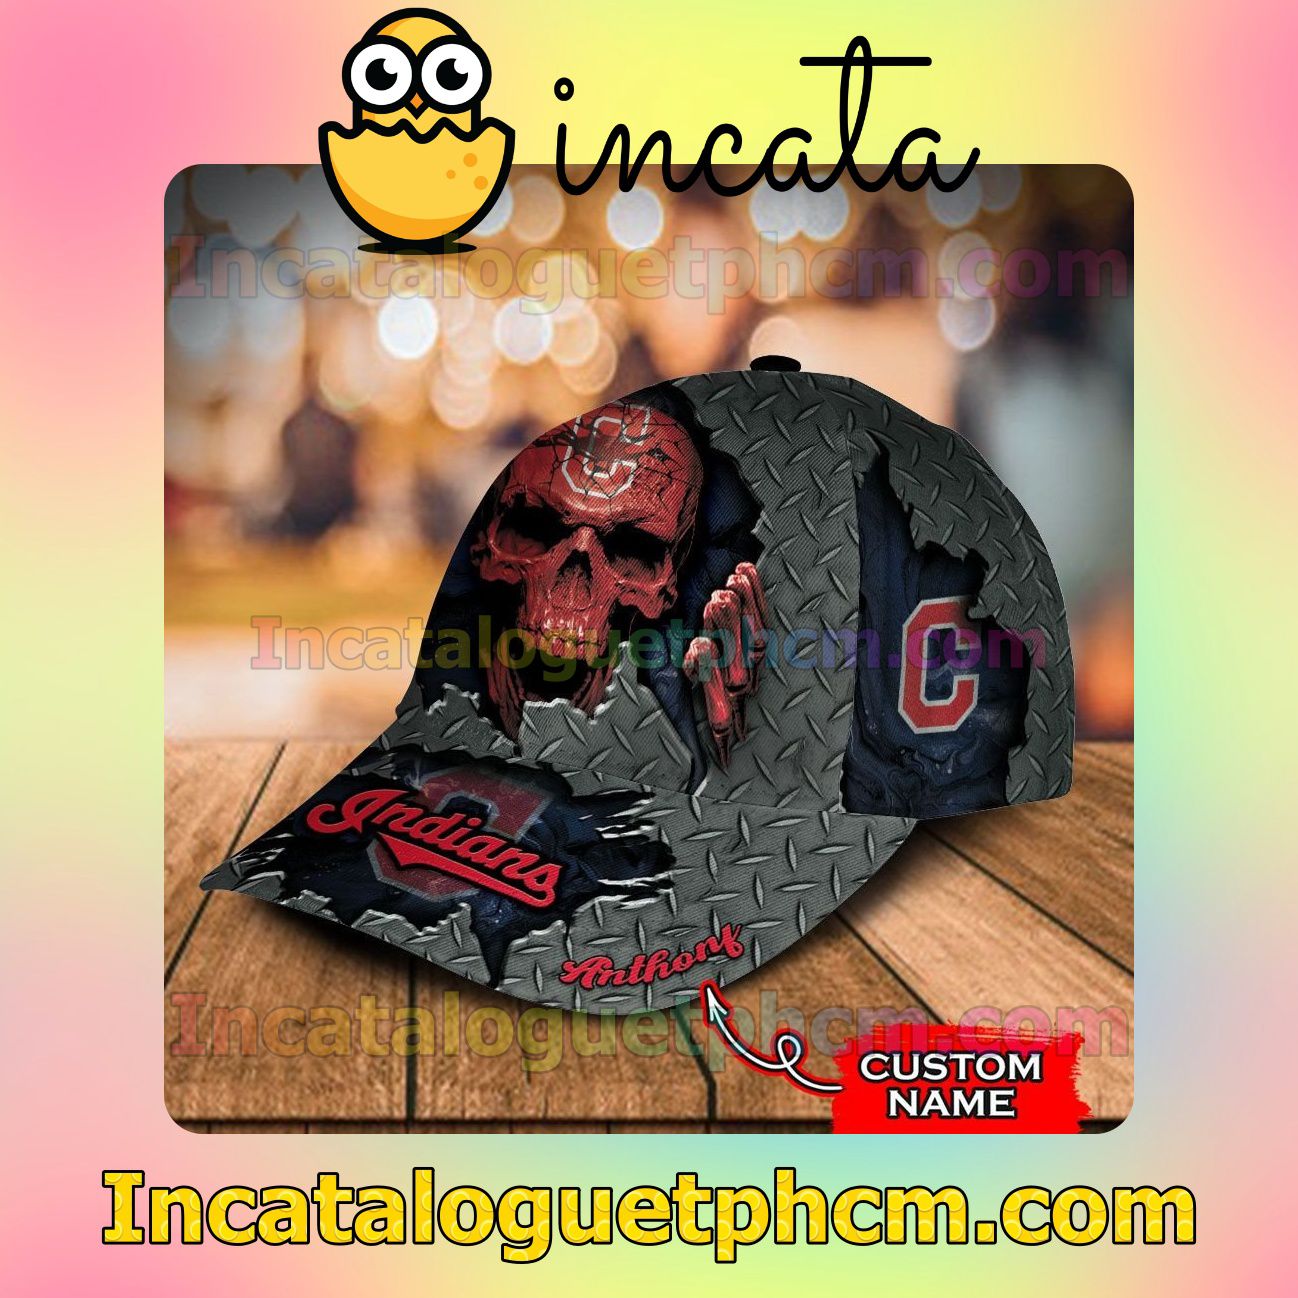 Sale Off Cleveland Indians Skull MLB Customized Hat Caps